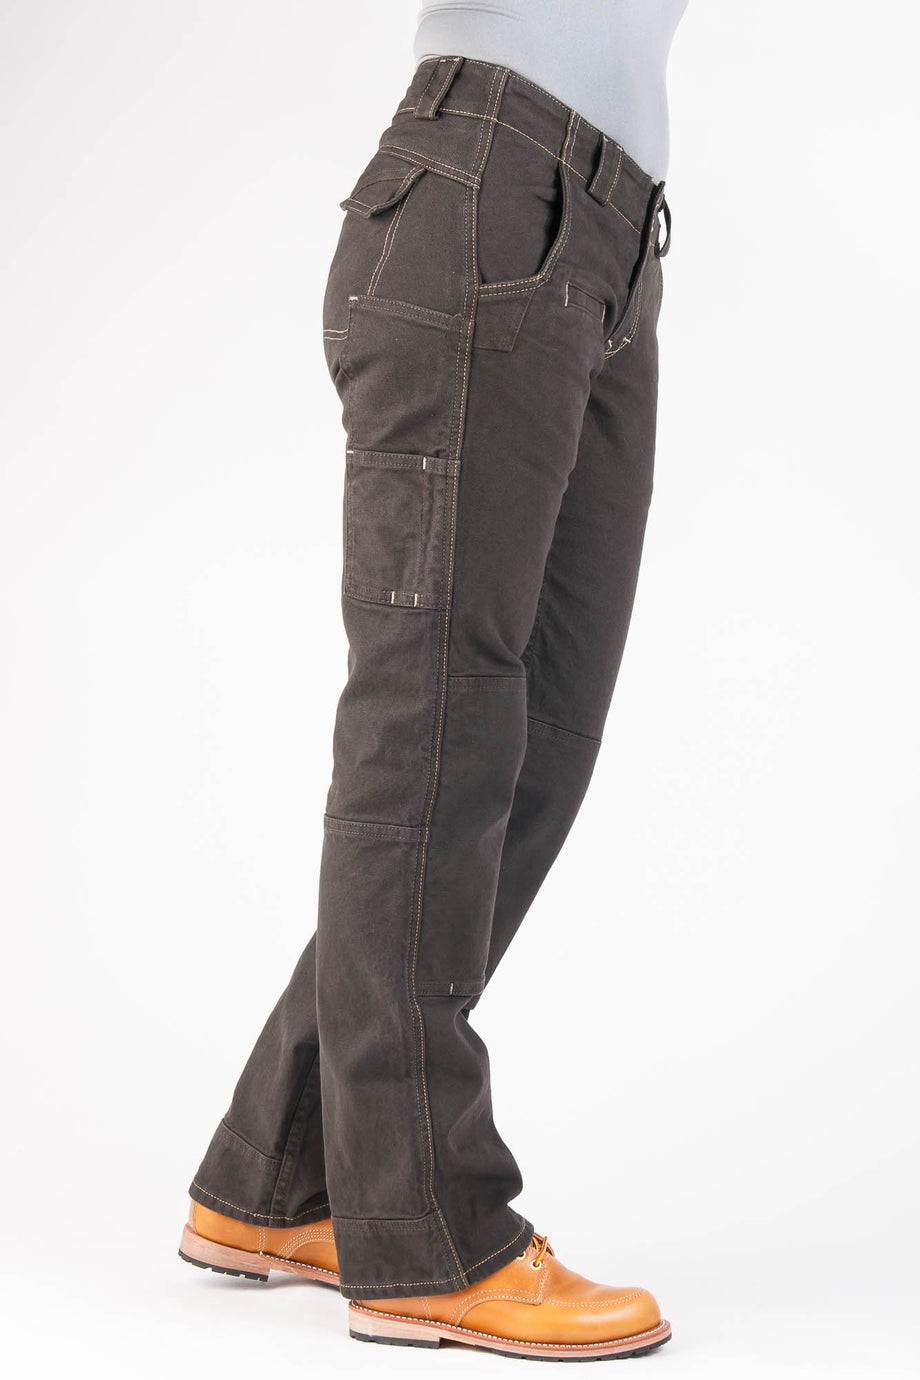 Dovetail Workwear Women's Reinforced Day Construction Work Pants